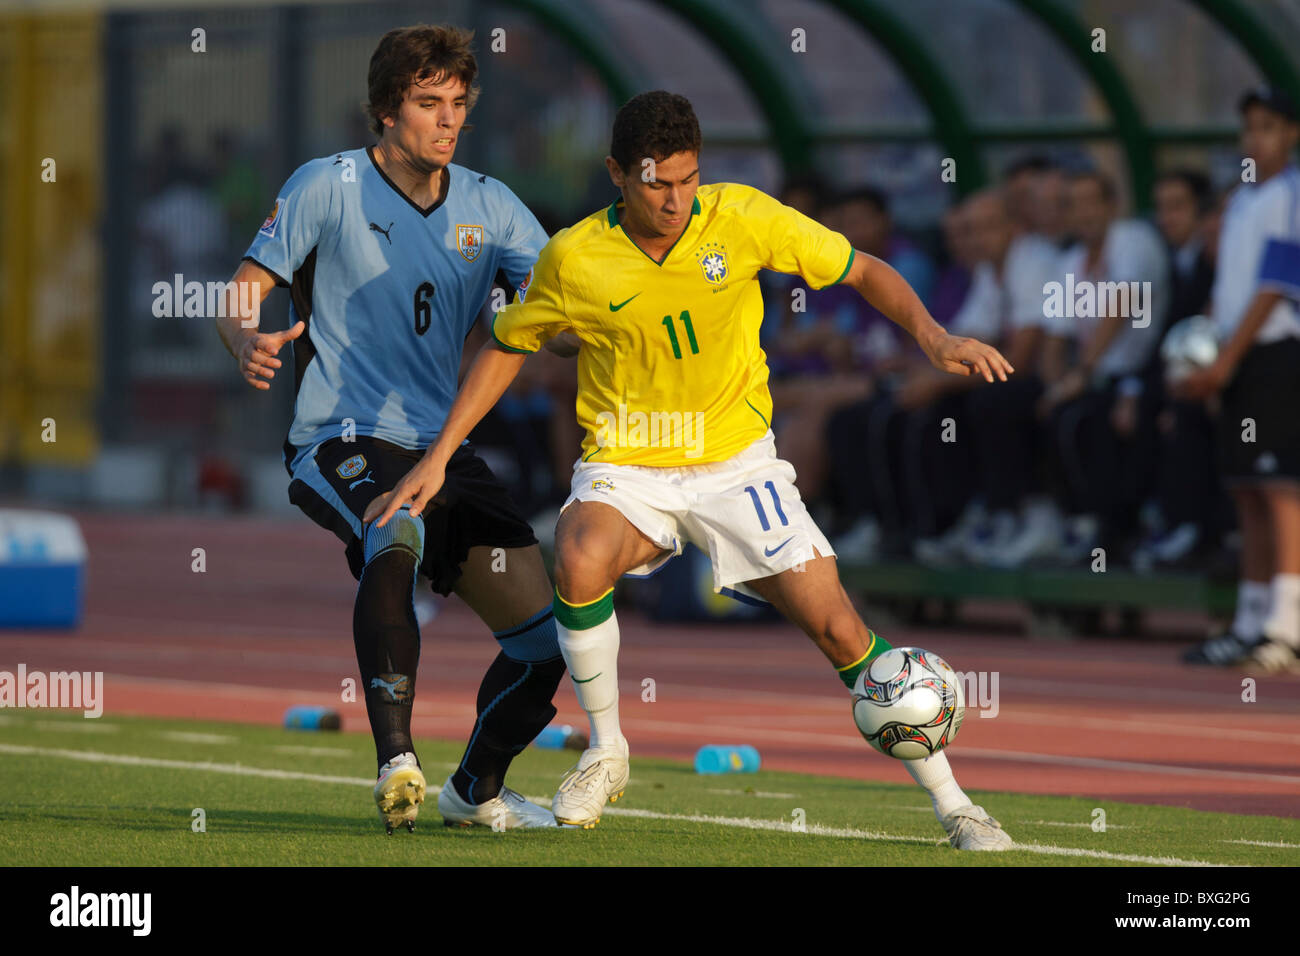 Leandro Cabrera of Uruguay (6) pressures Ganso of Brazil (11) during a FIFA U-20 World Cup round of 16 match October 7, 2009. Stock Photo